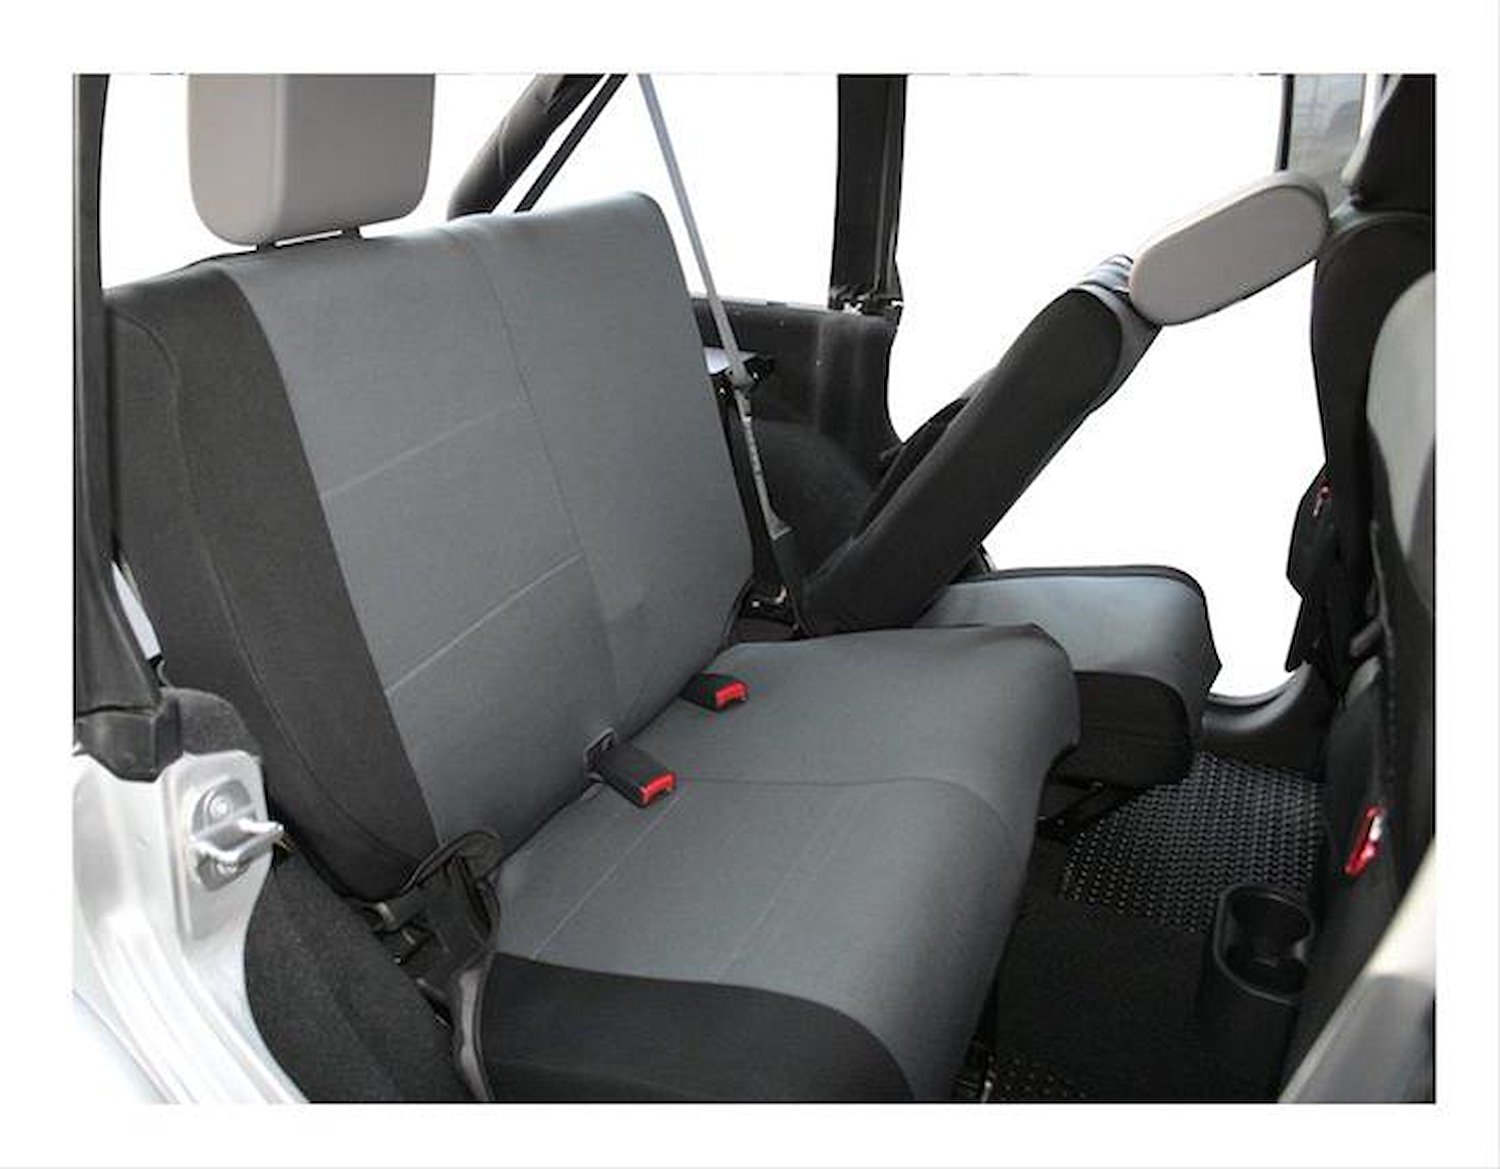 SC30221 Rear Polycanvas Seat Cover for Jeep 2007-2011 JK Wrangler w/ 4-Doors; Black and Gray